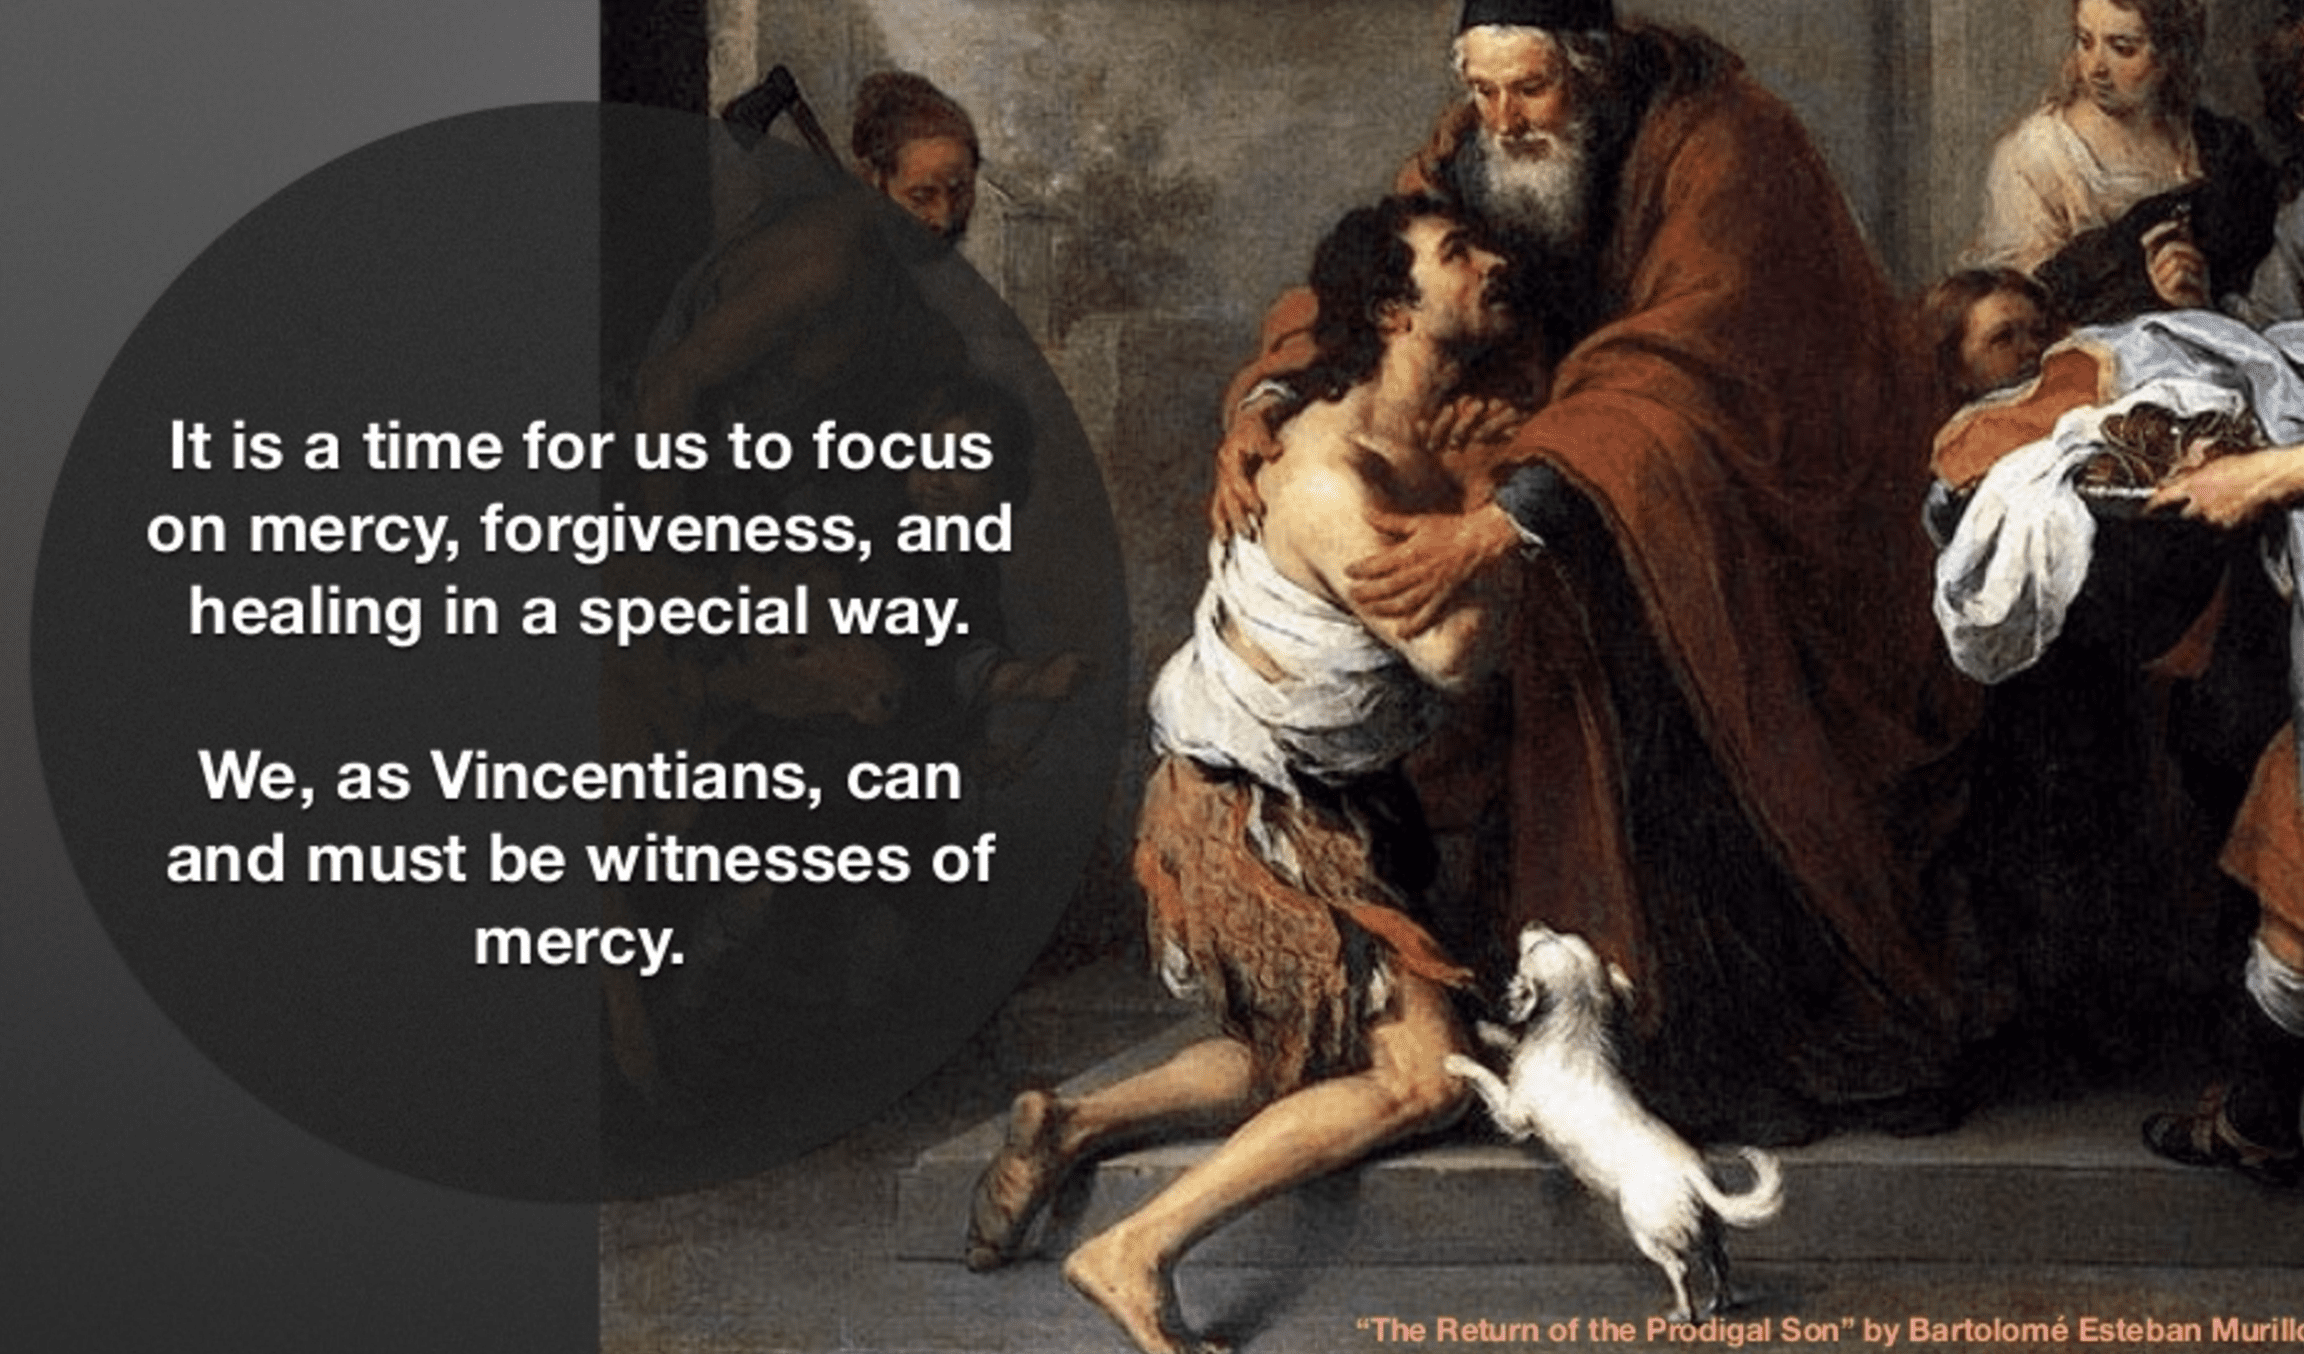 Vincentian Convictions and Gestures with regard to Mercy